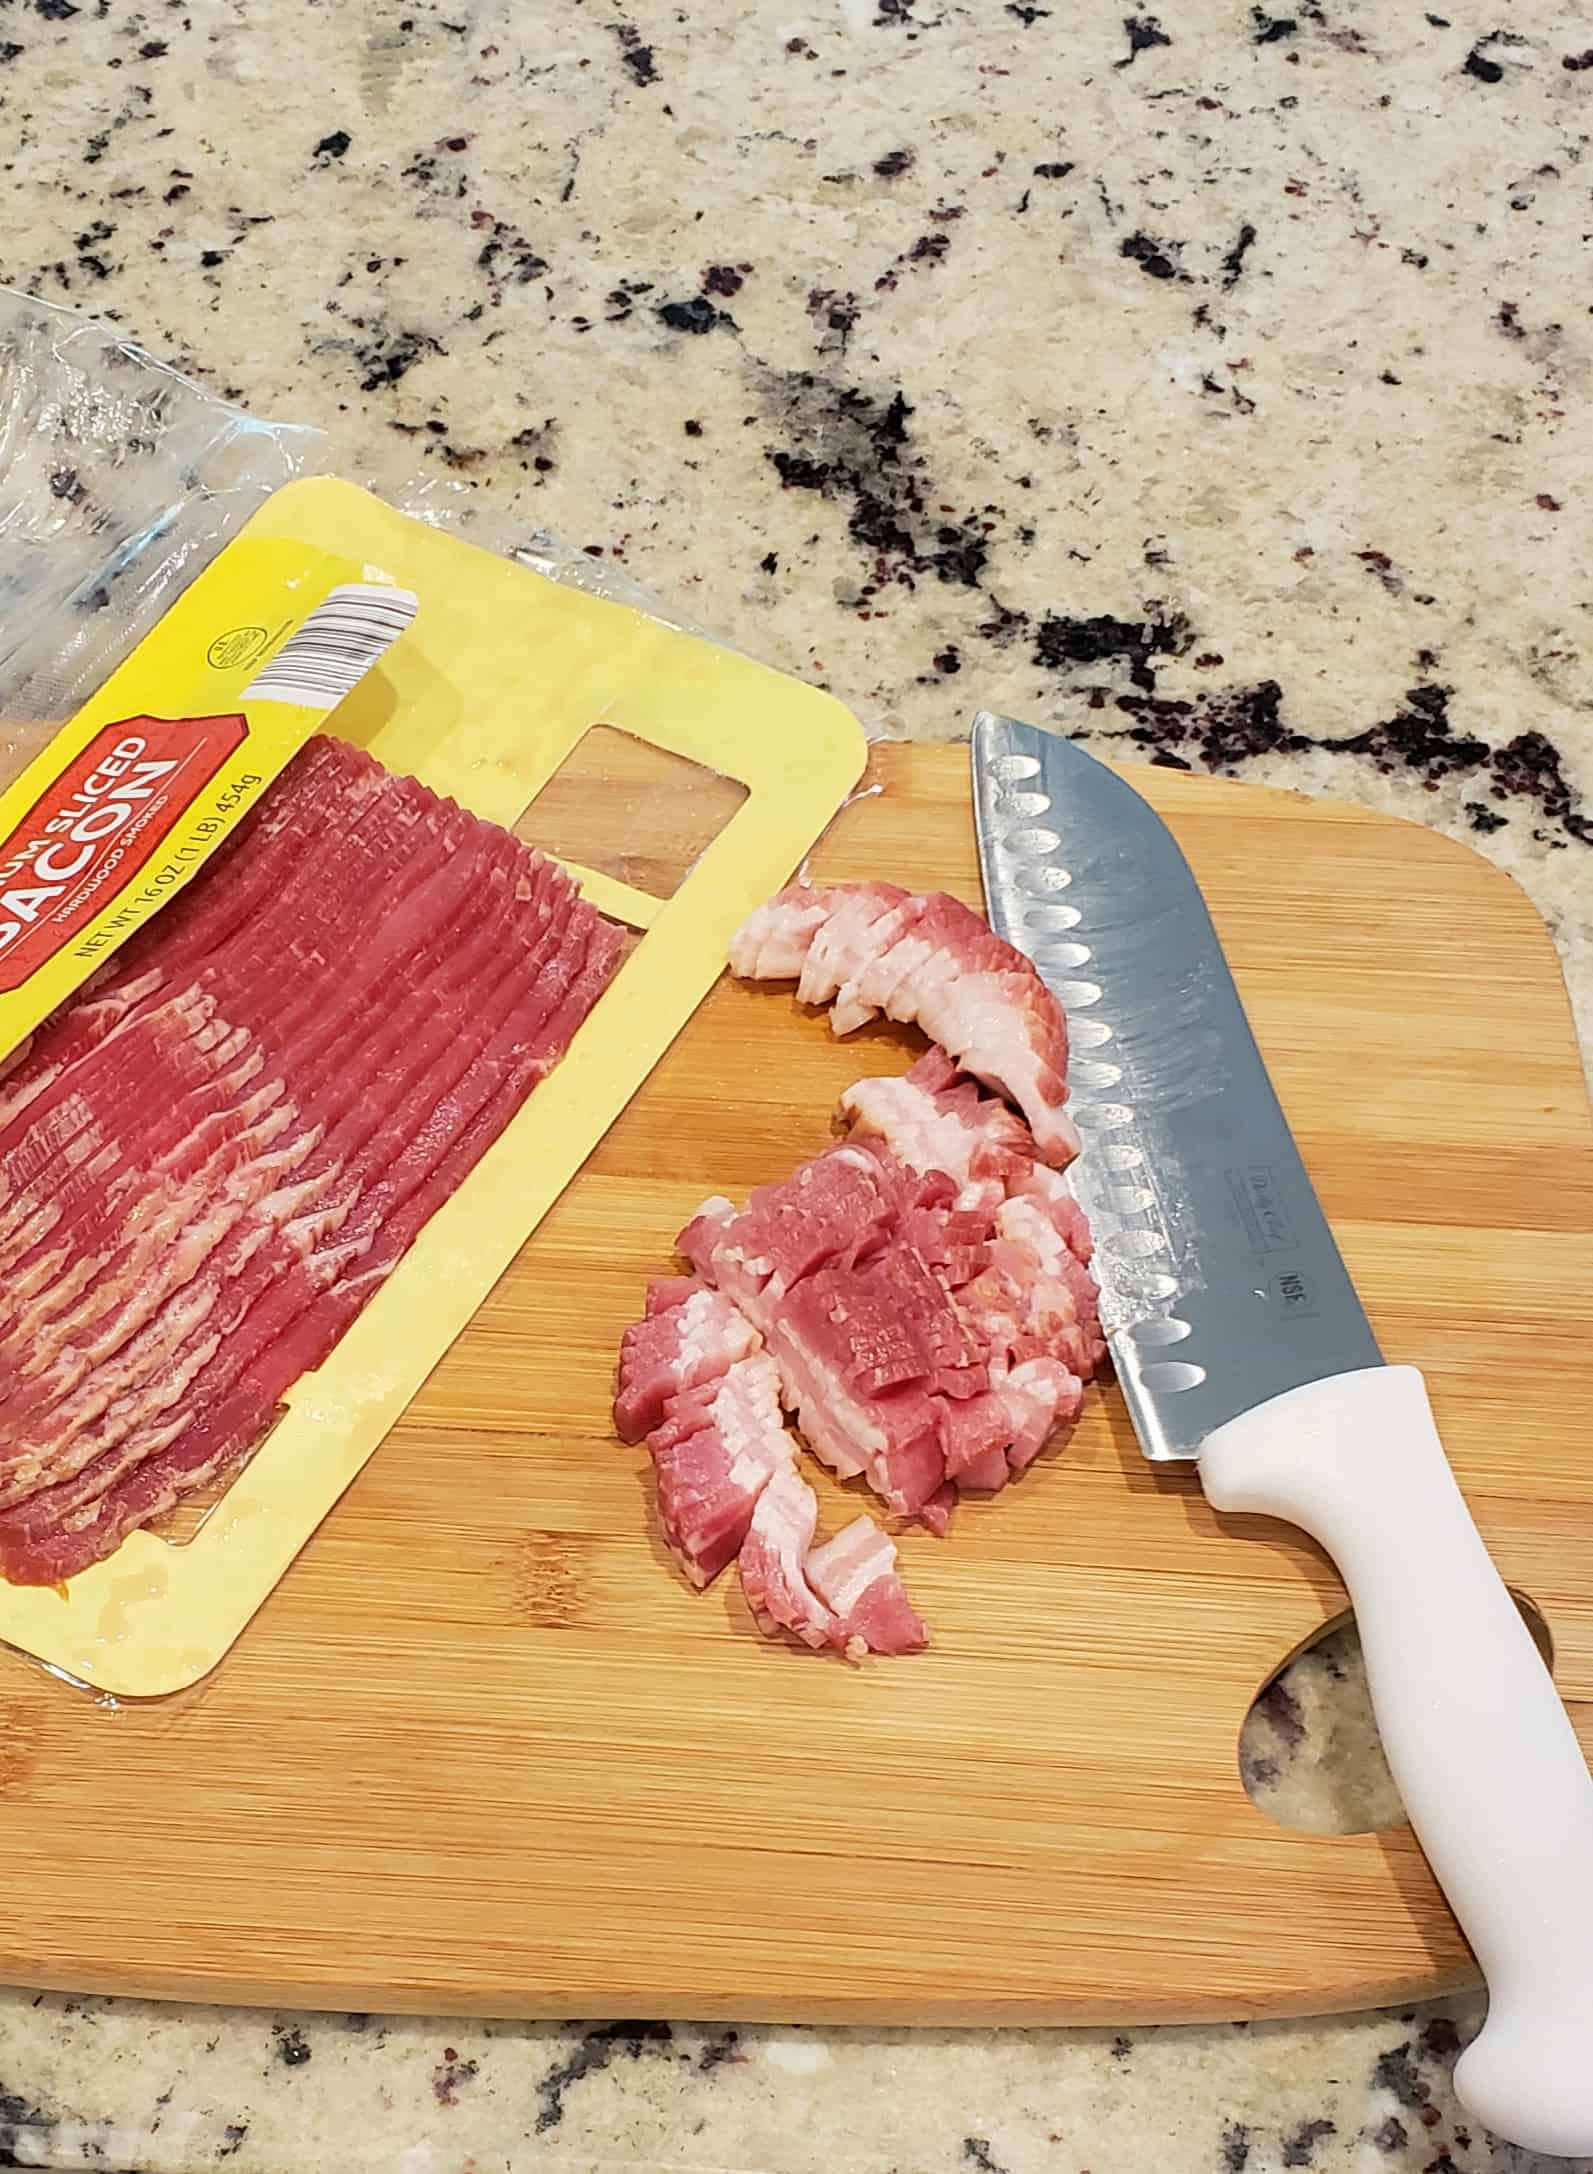  slices of bacon cut up on a wooden cutting board